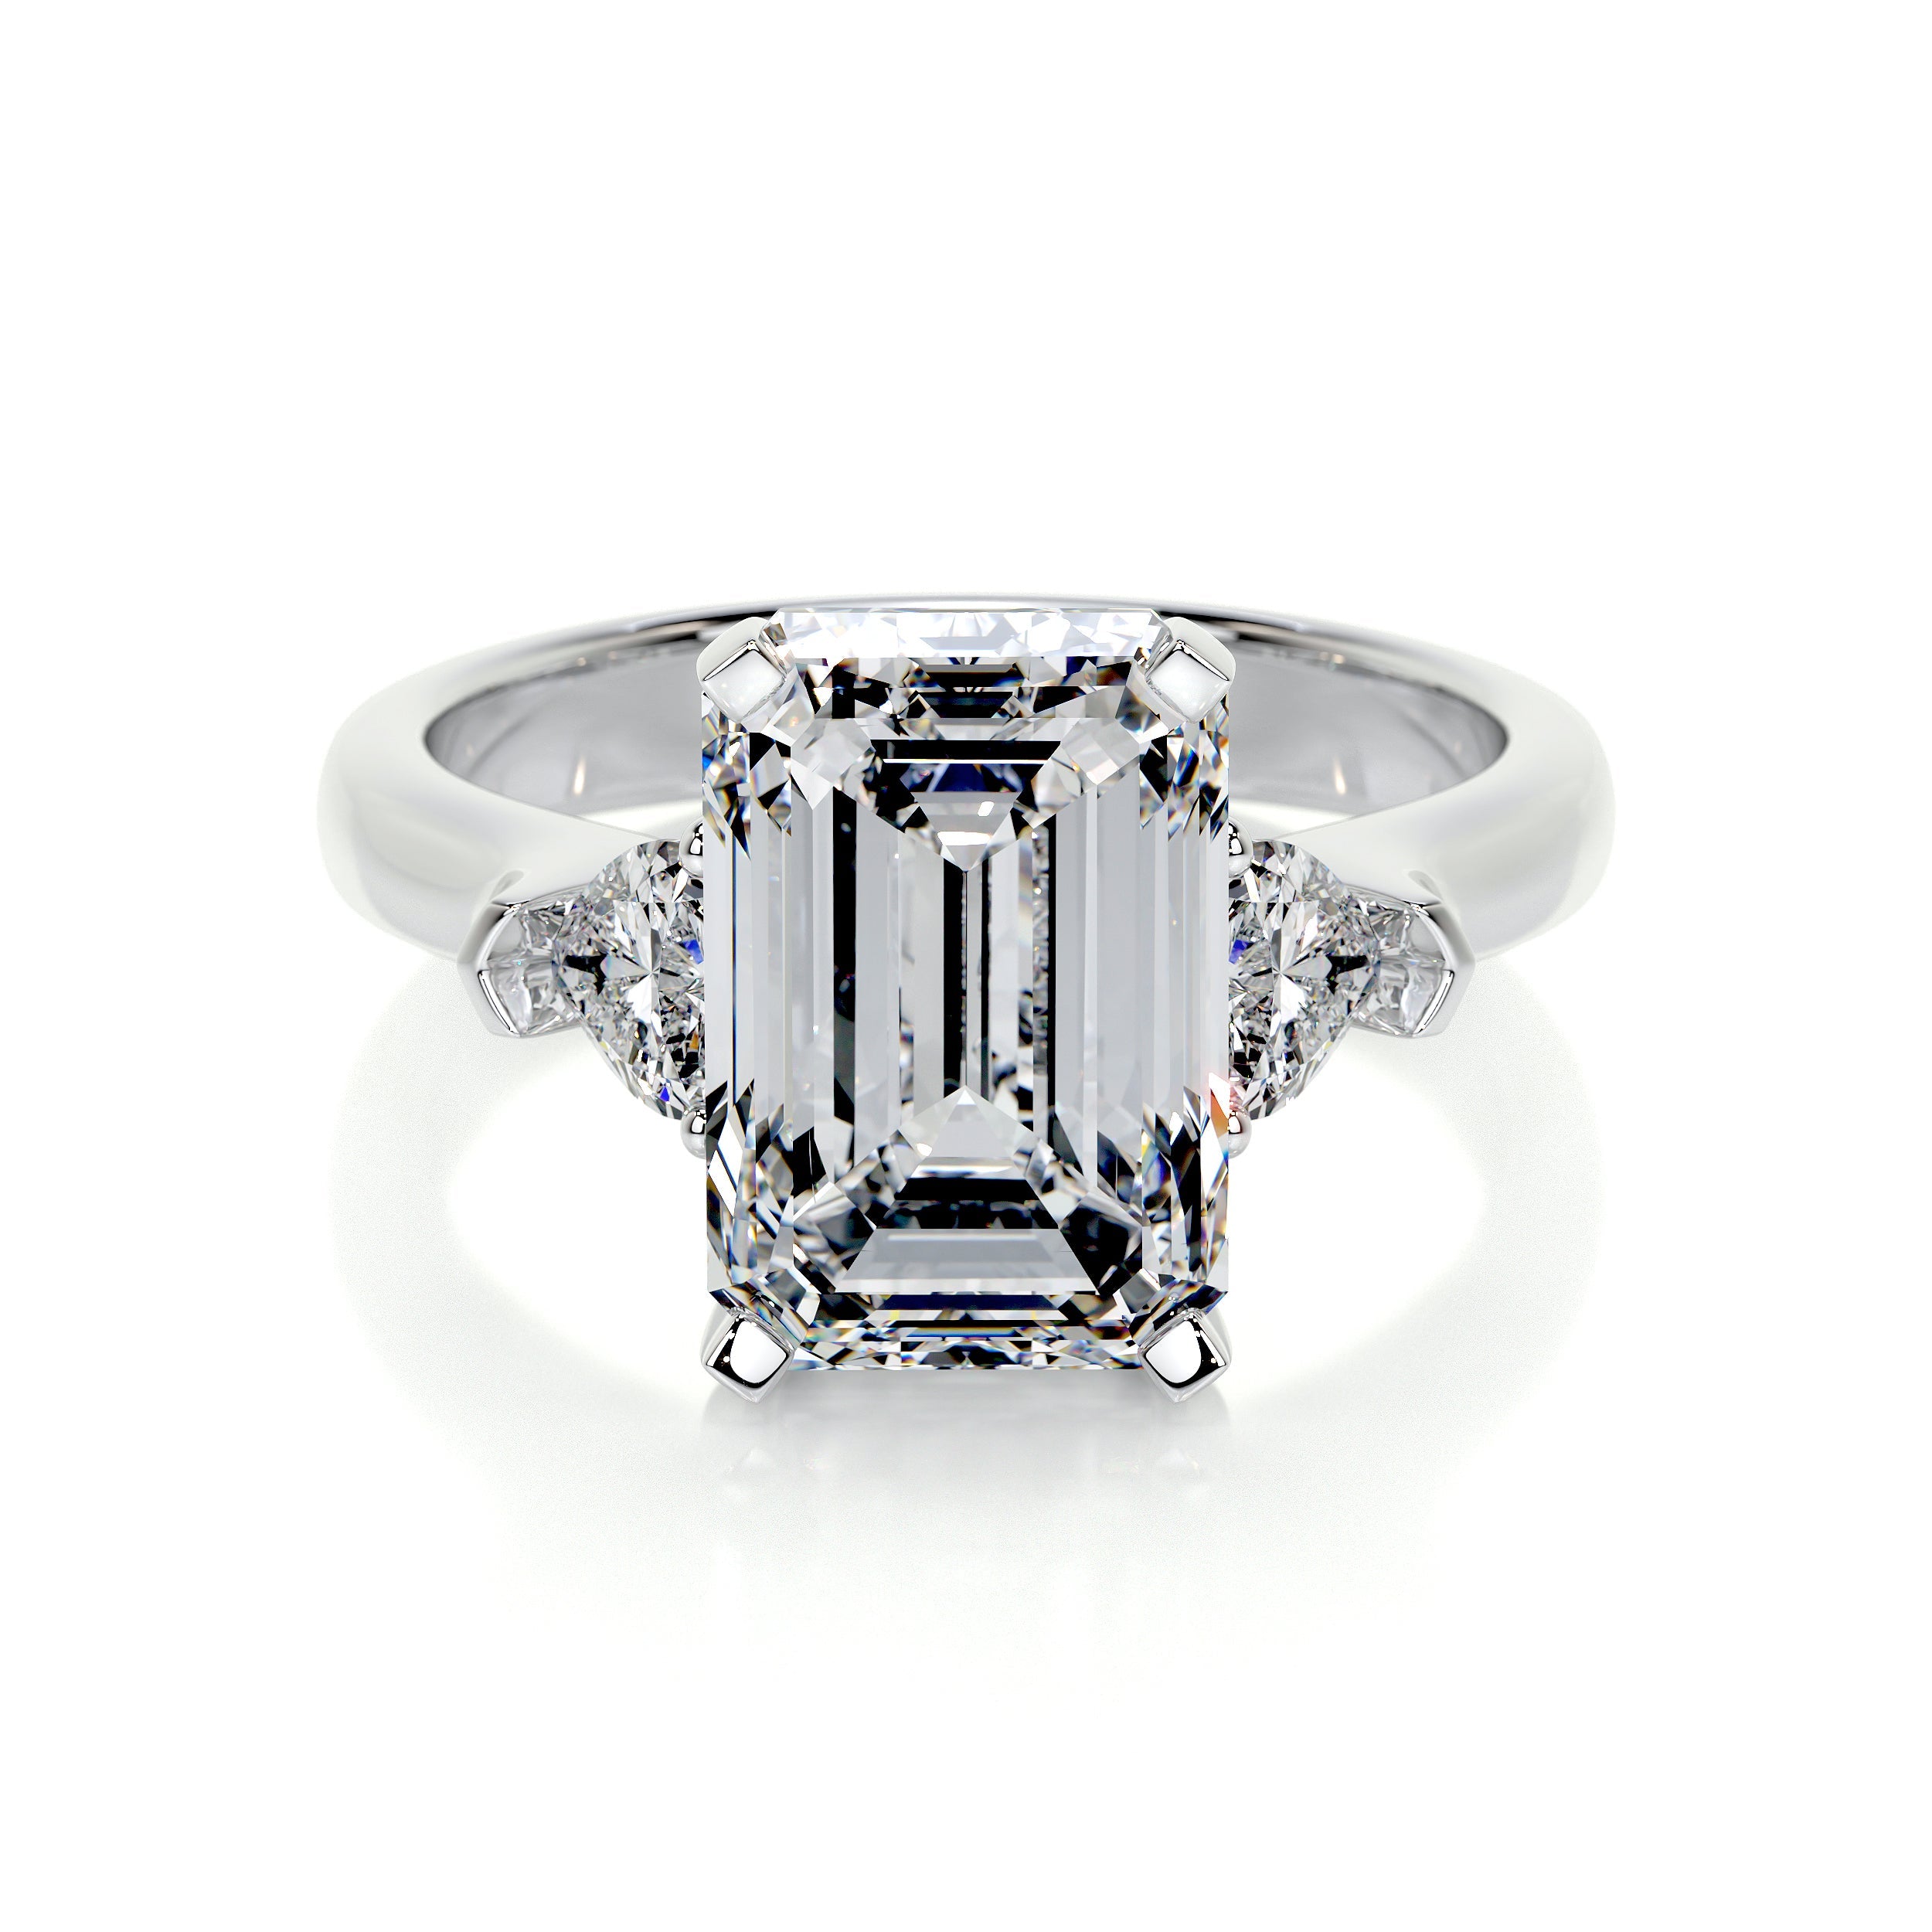 2.70ct Emerald Cut with Solitaire Bezel Setting Engagement Ring